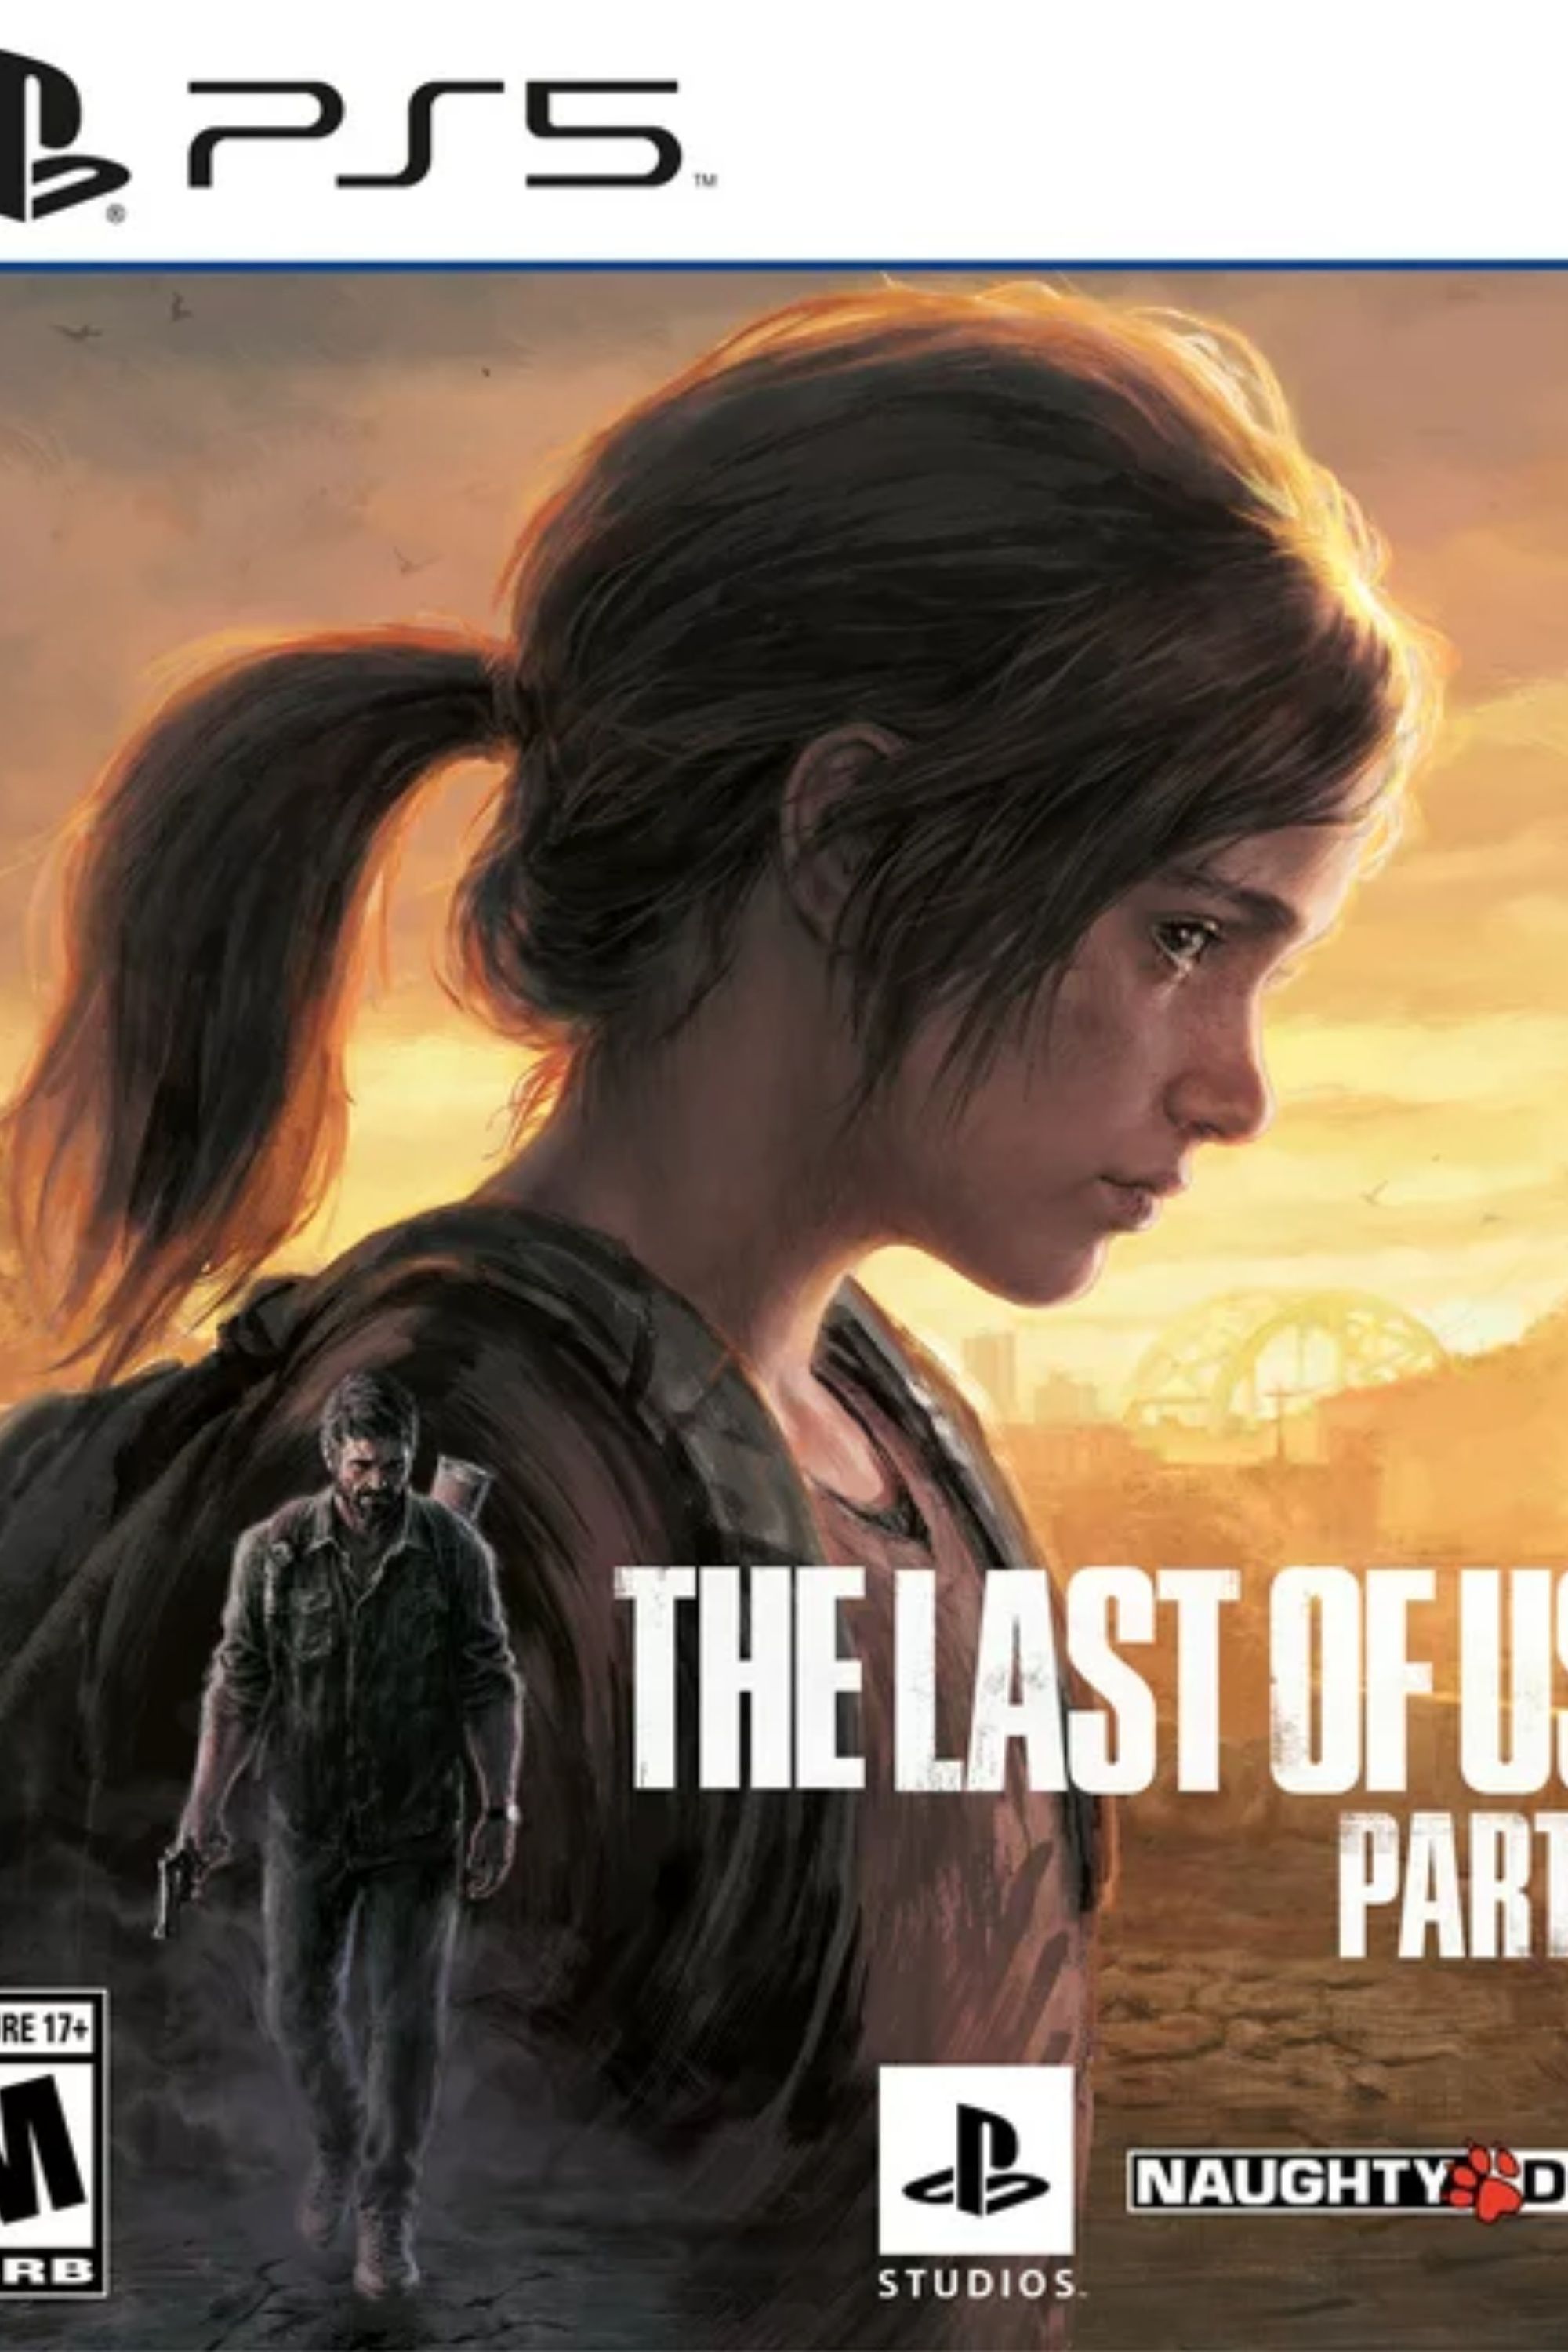 the last of us part 1 on ps5 cover art